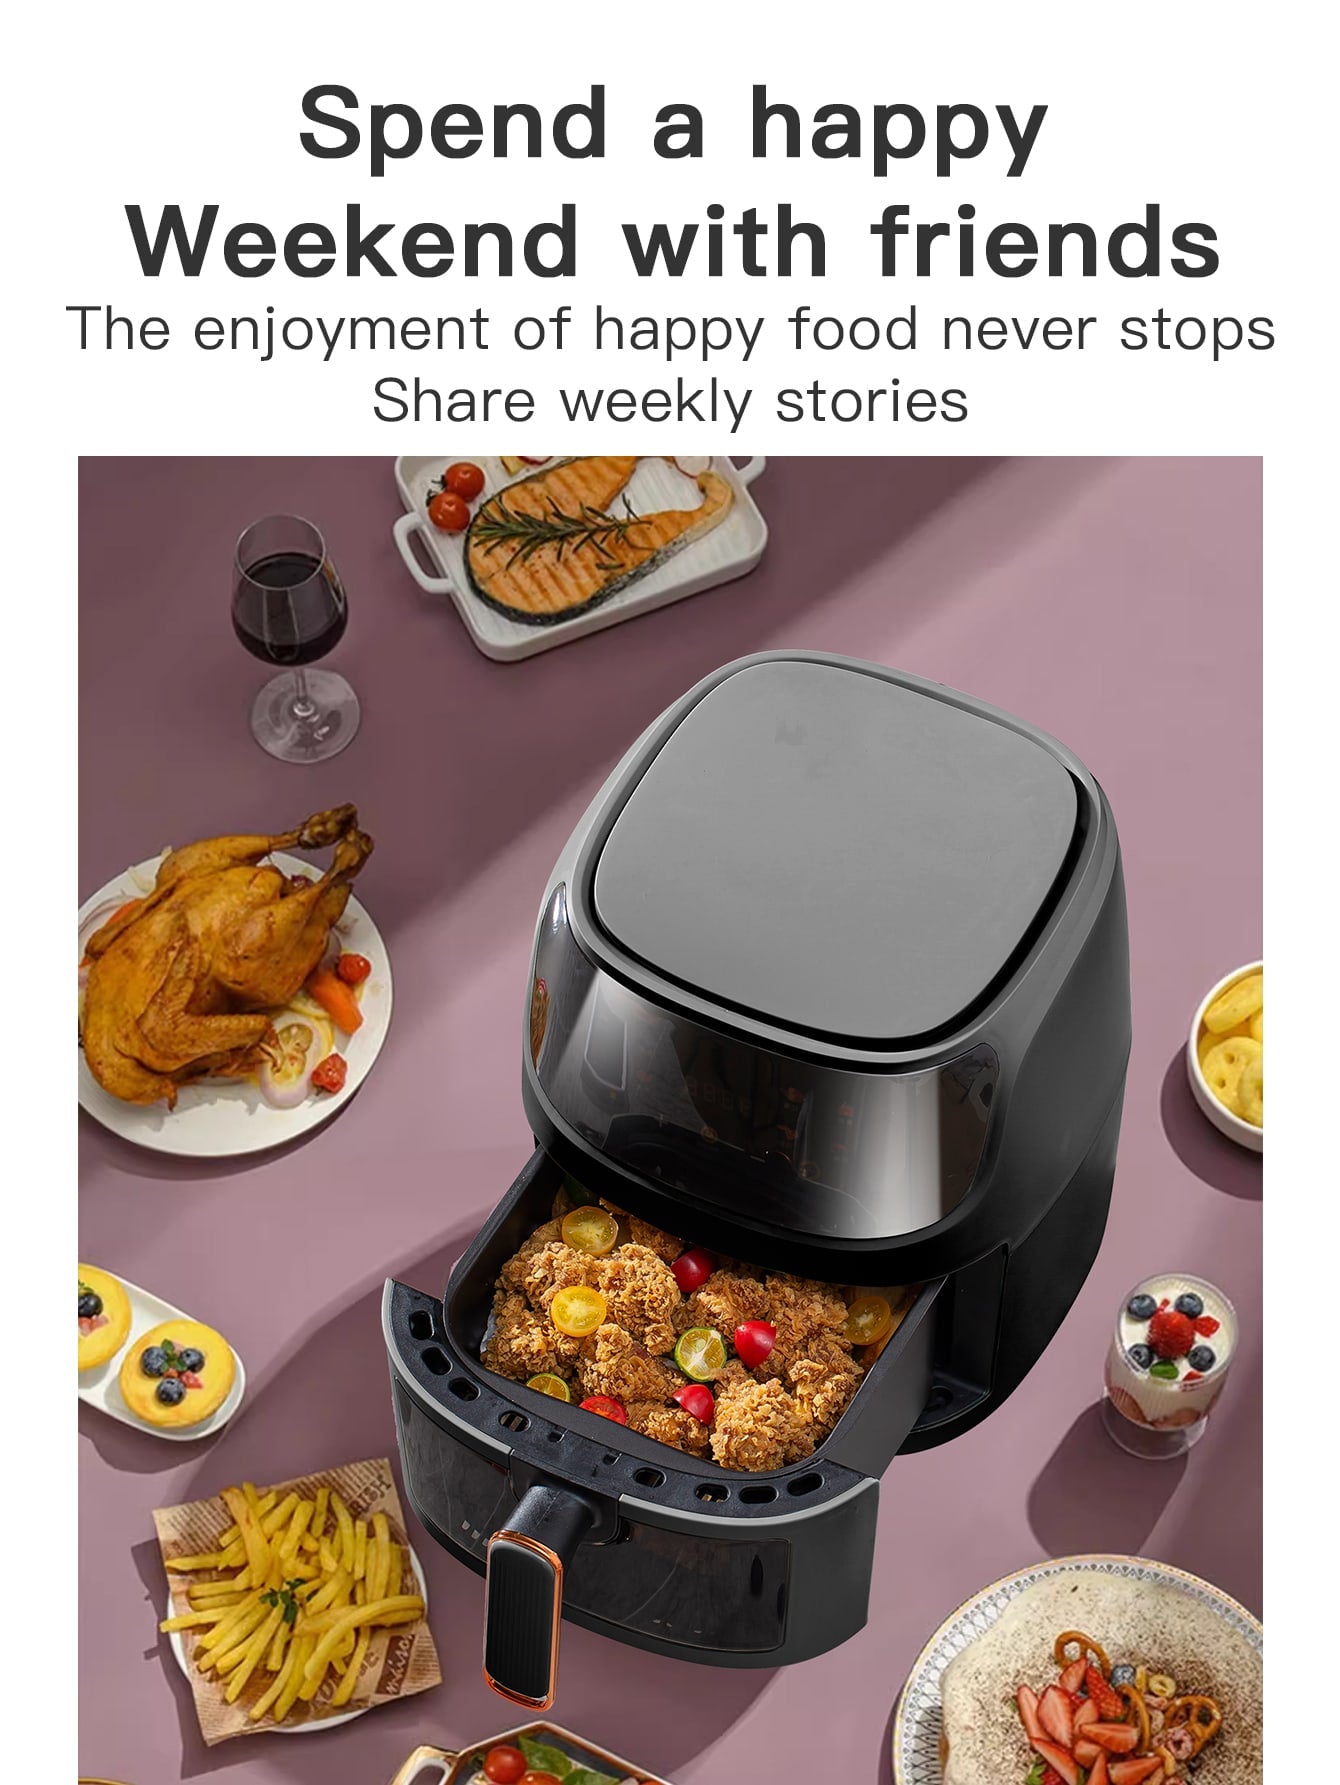 1pc Desktop Electric 6l Large Capacity Multi-functional Visible Air Fryer Qf-606 With Color Touch Screen, Suitable For Party Chicken Wings, Fries, Steak, For Home Cooking-Black-5